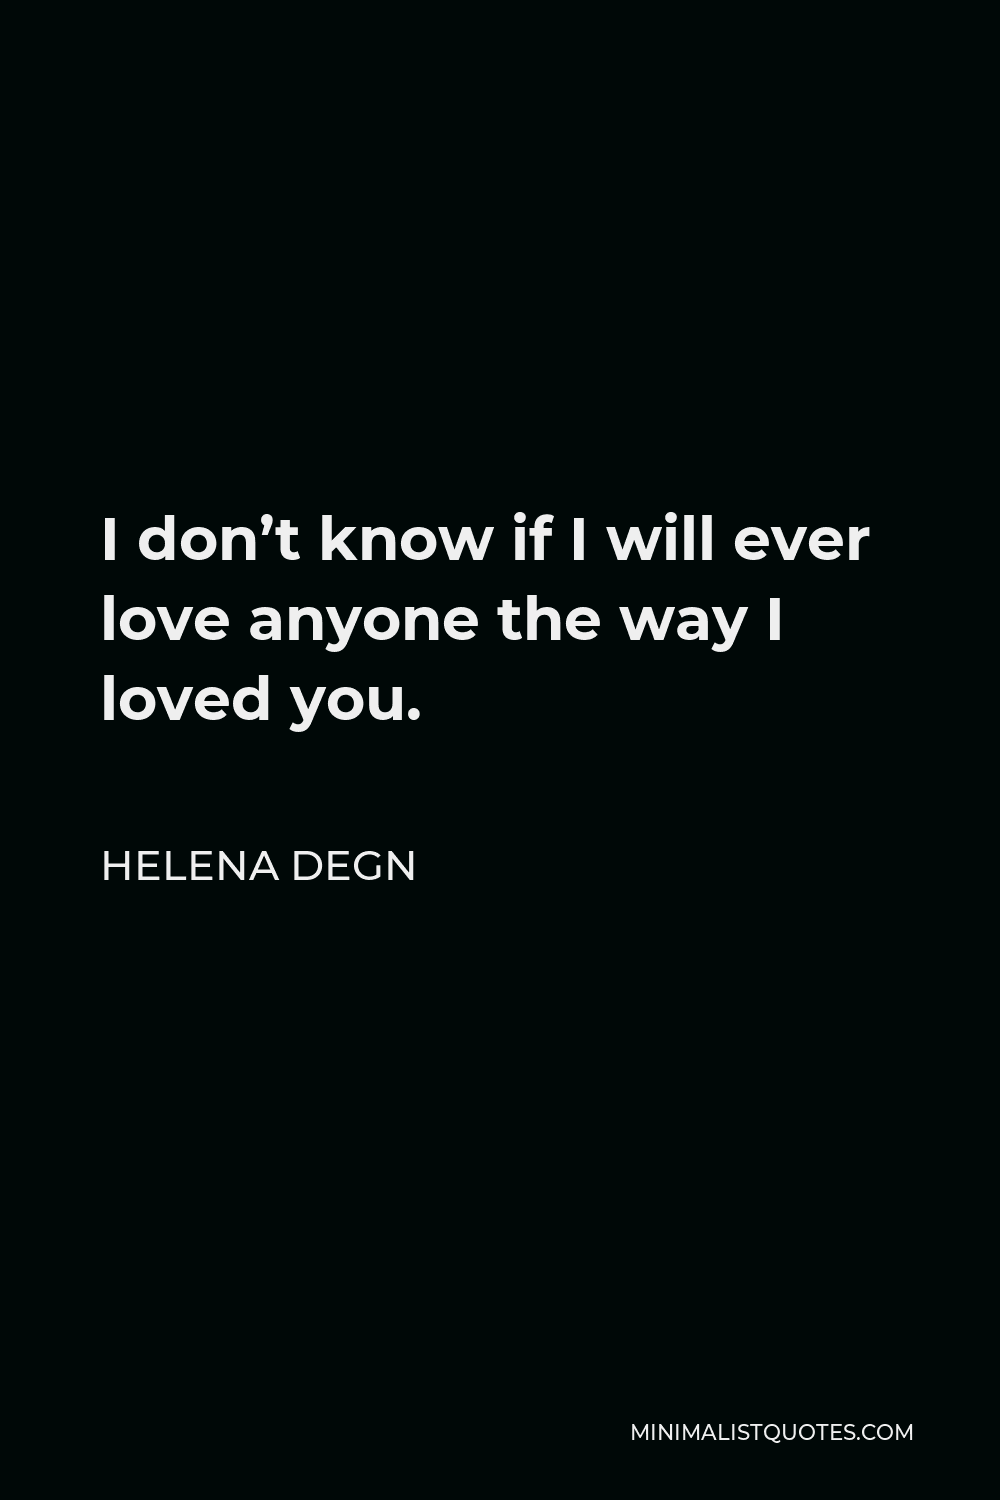 Helena Degn Quote - I don’t know if I will ever love anyone the way I loved you.